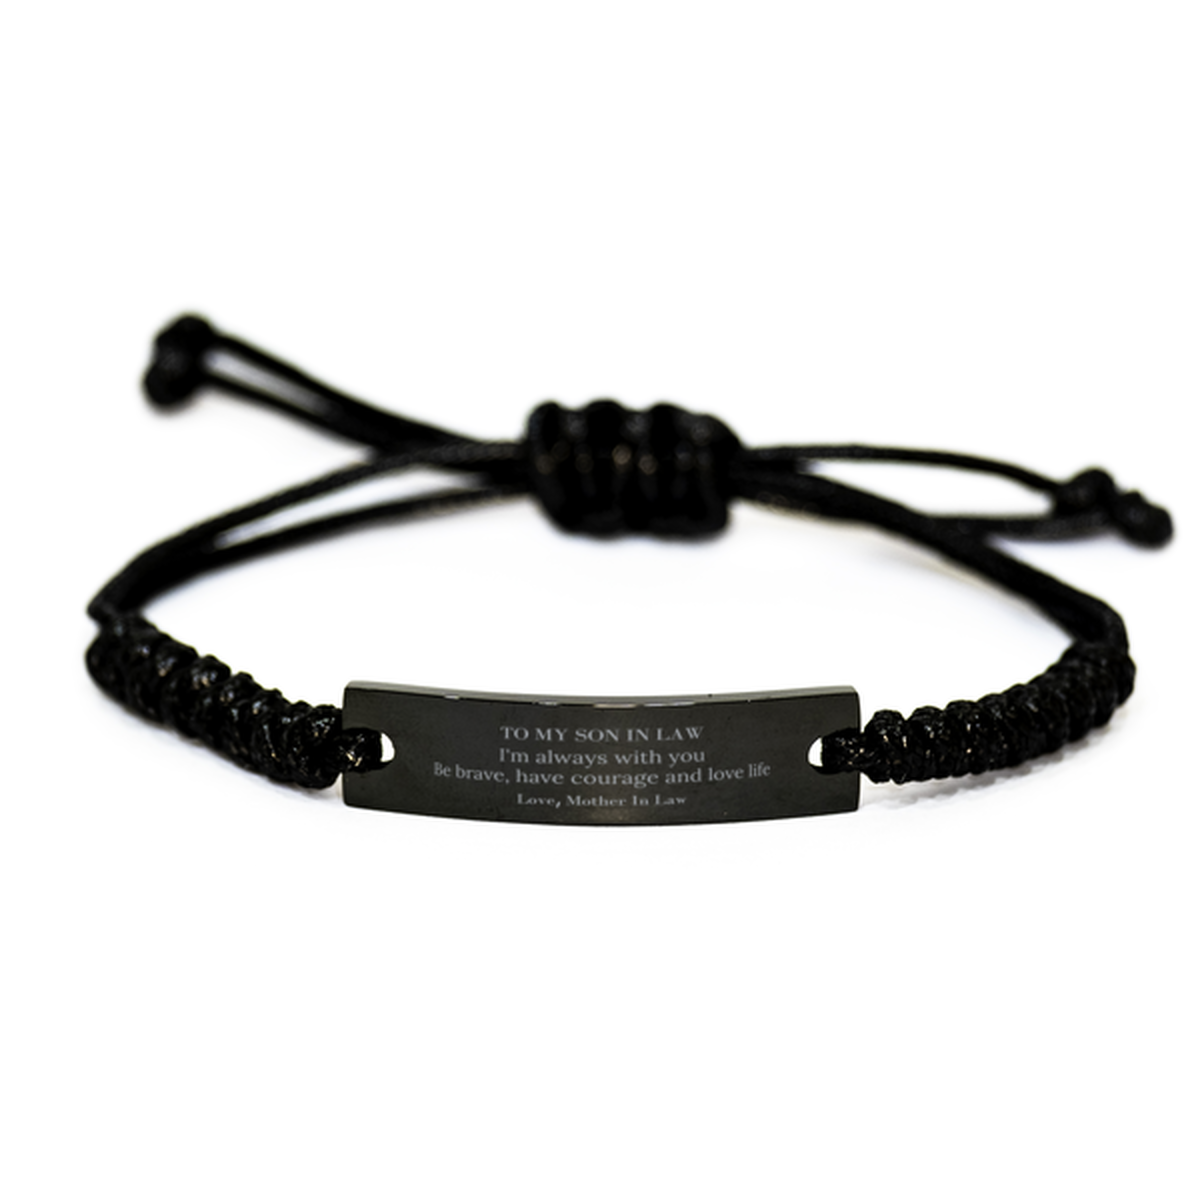 To My Son In Law Gifts from Mother In Law, Unique Black Rope Bracelet Inspirational Christmas Birthday Graduation Gifts for Son In Law I'm always with you. Be brave, have courage and love life. Love, Mother In Law